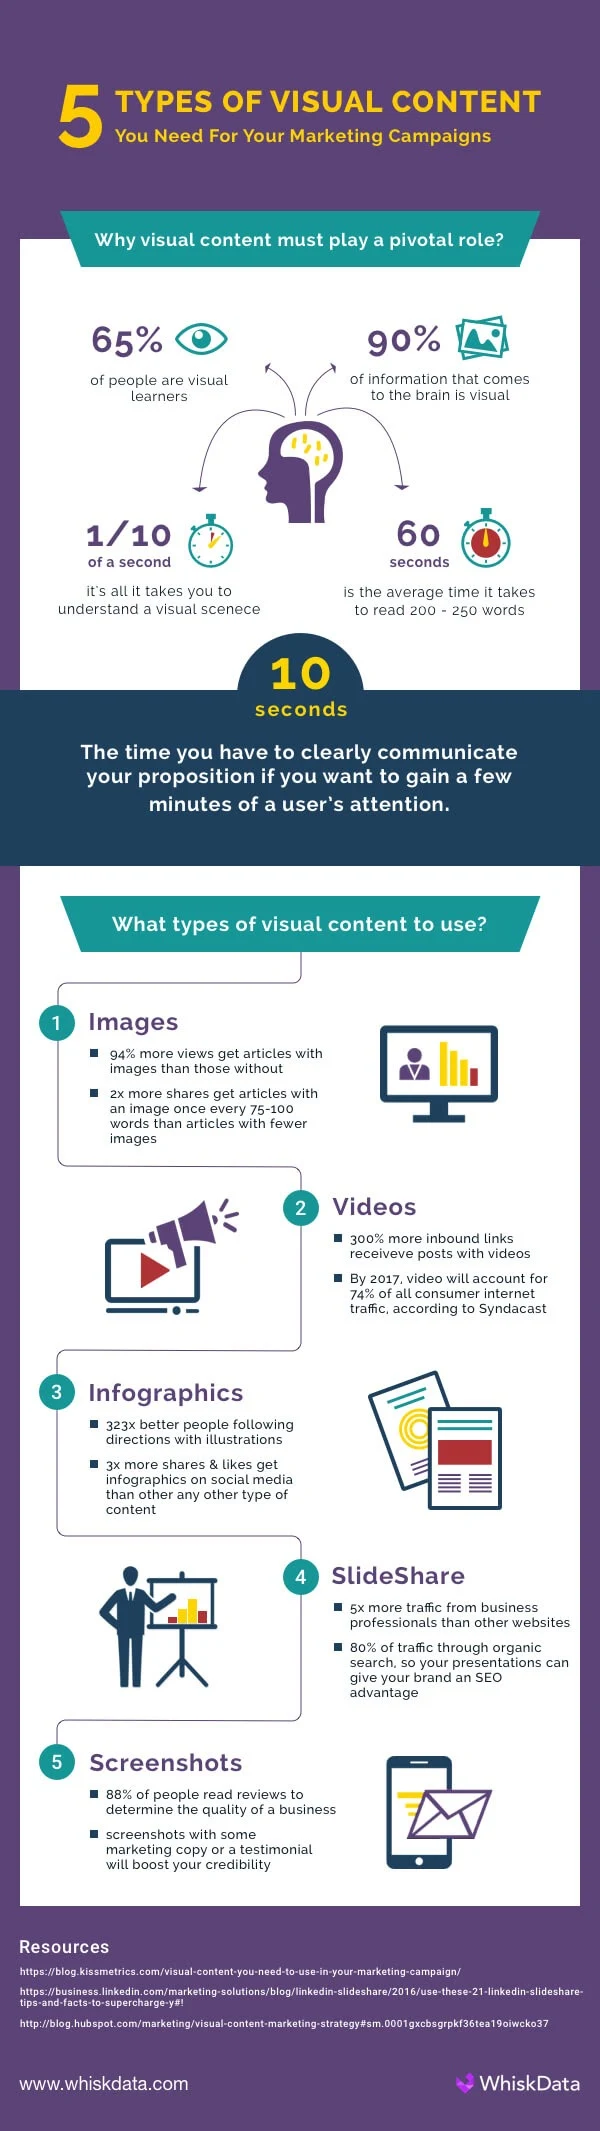 5 Types of Visual Content You Need for Your Marketing Campaign [Infographic]